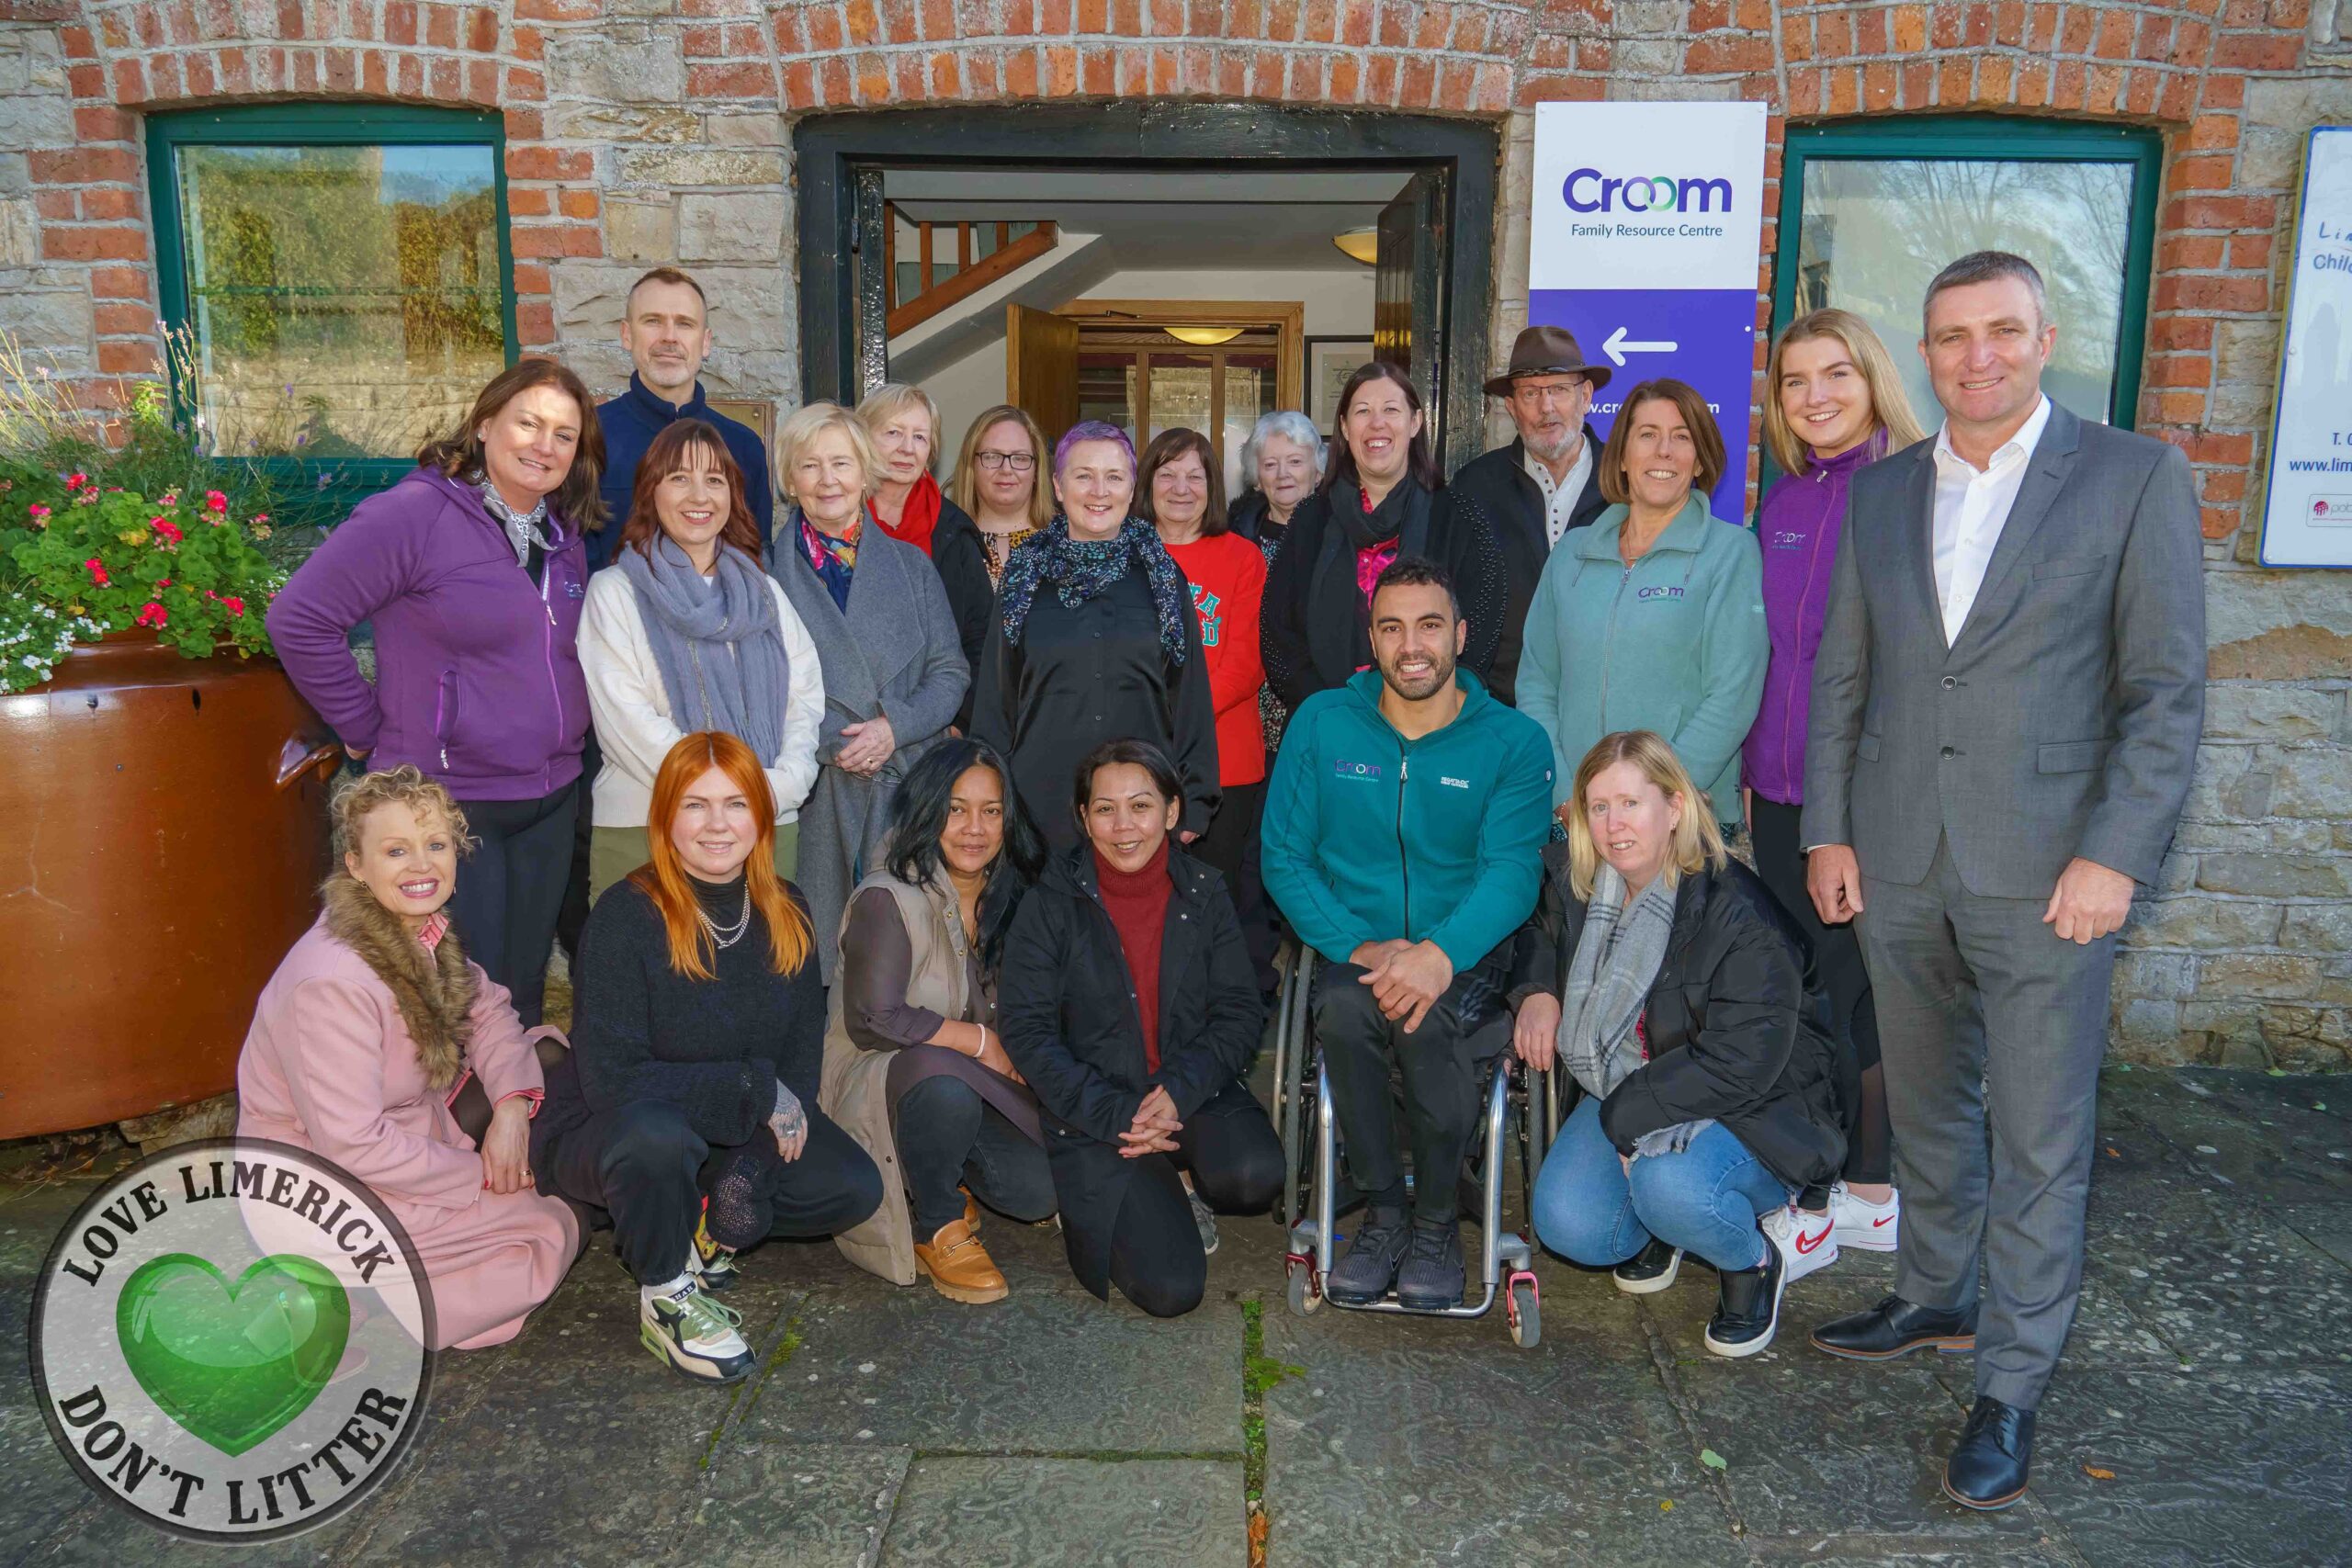 Croom Family Resource Centre supports the community to become active members of society